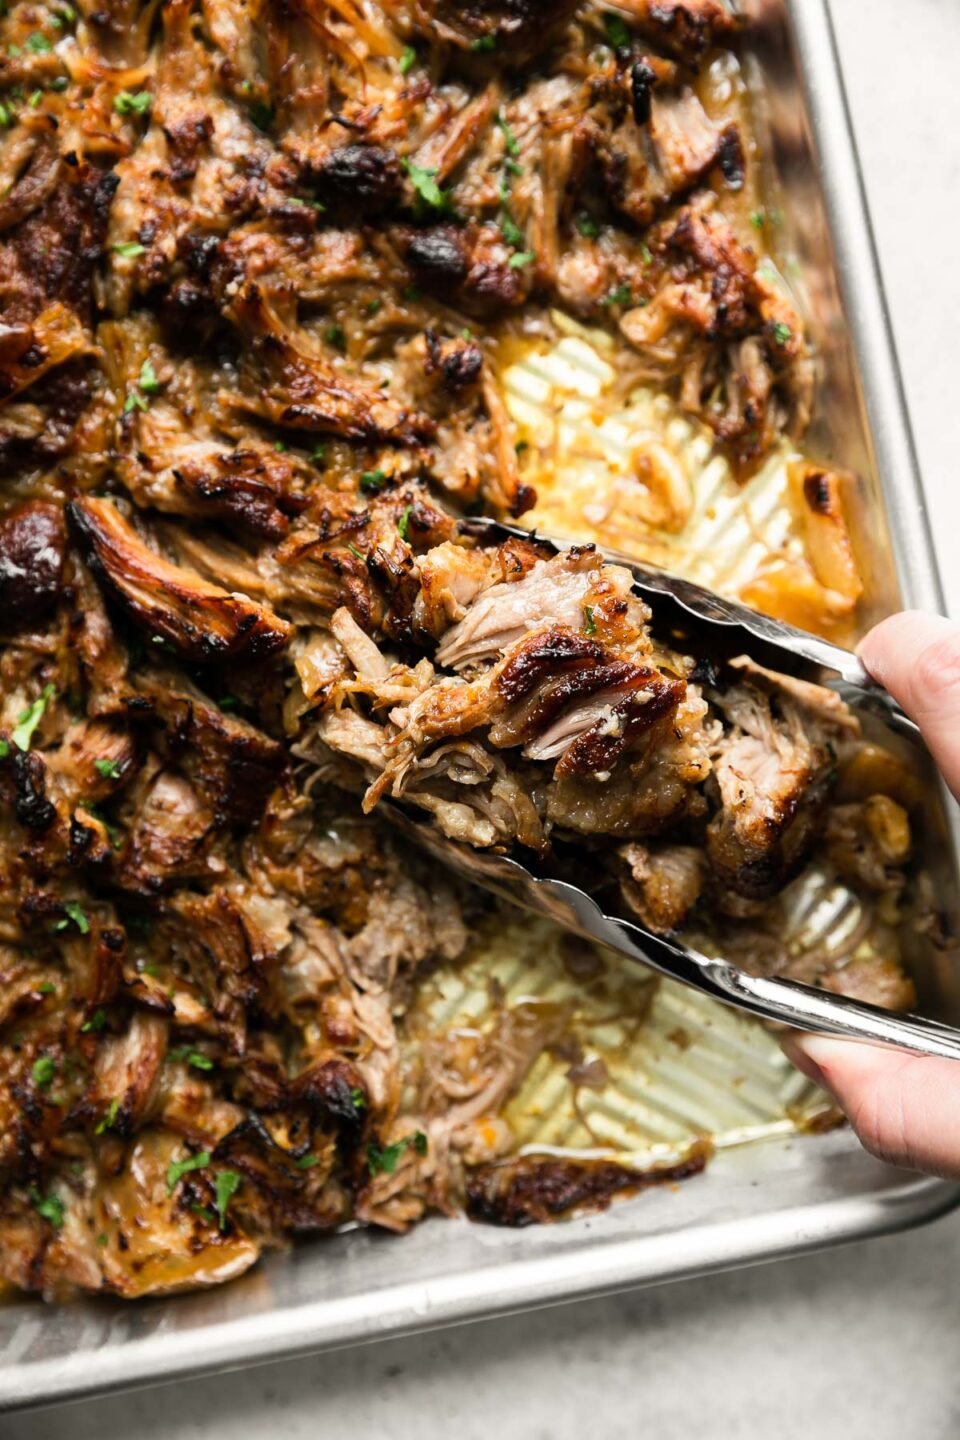 Cooked & shredded pork carnitas arranged on an aluminum baking sheet & broiled until golden brown with crisped edges. A woman's hand holds a pair of tongs & uses the tongs to scoop up some of the finished carnitas off of the baking sheet. The baking sheet sits atop a creamy white textured surface and the beer braised carnitas have been garnished with fresh cilantro.